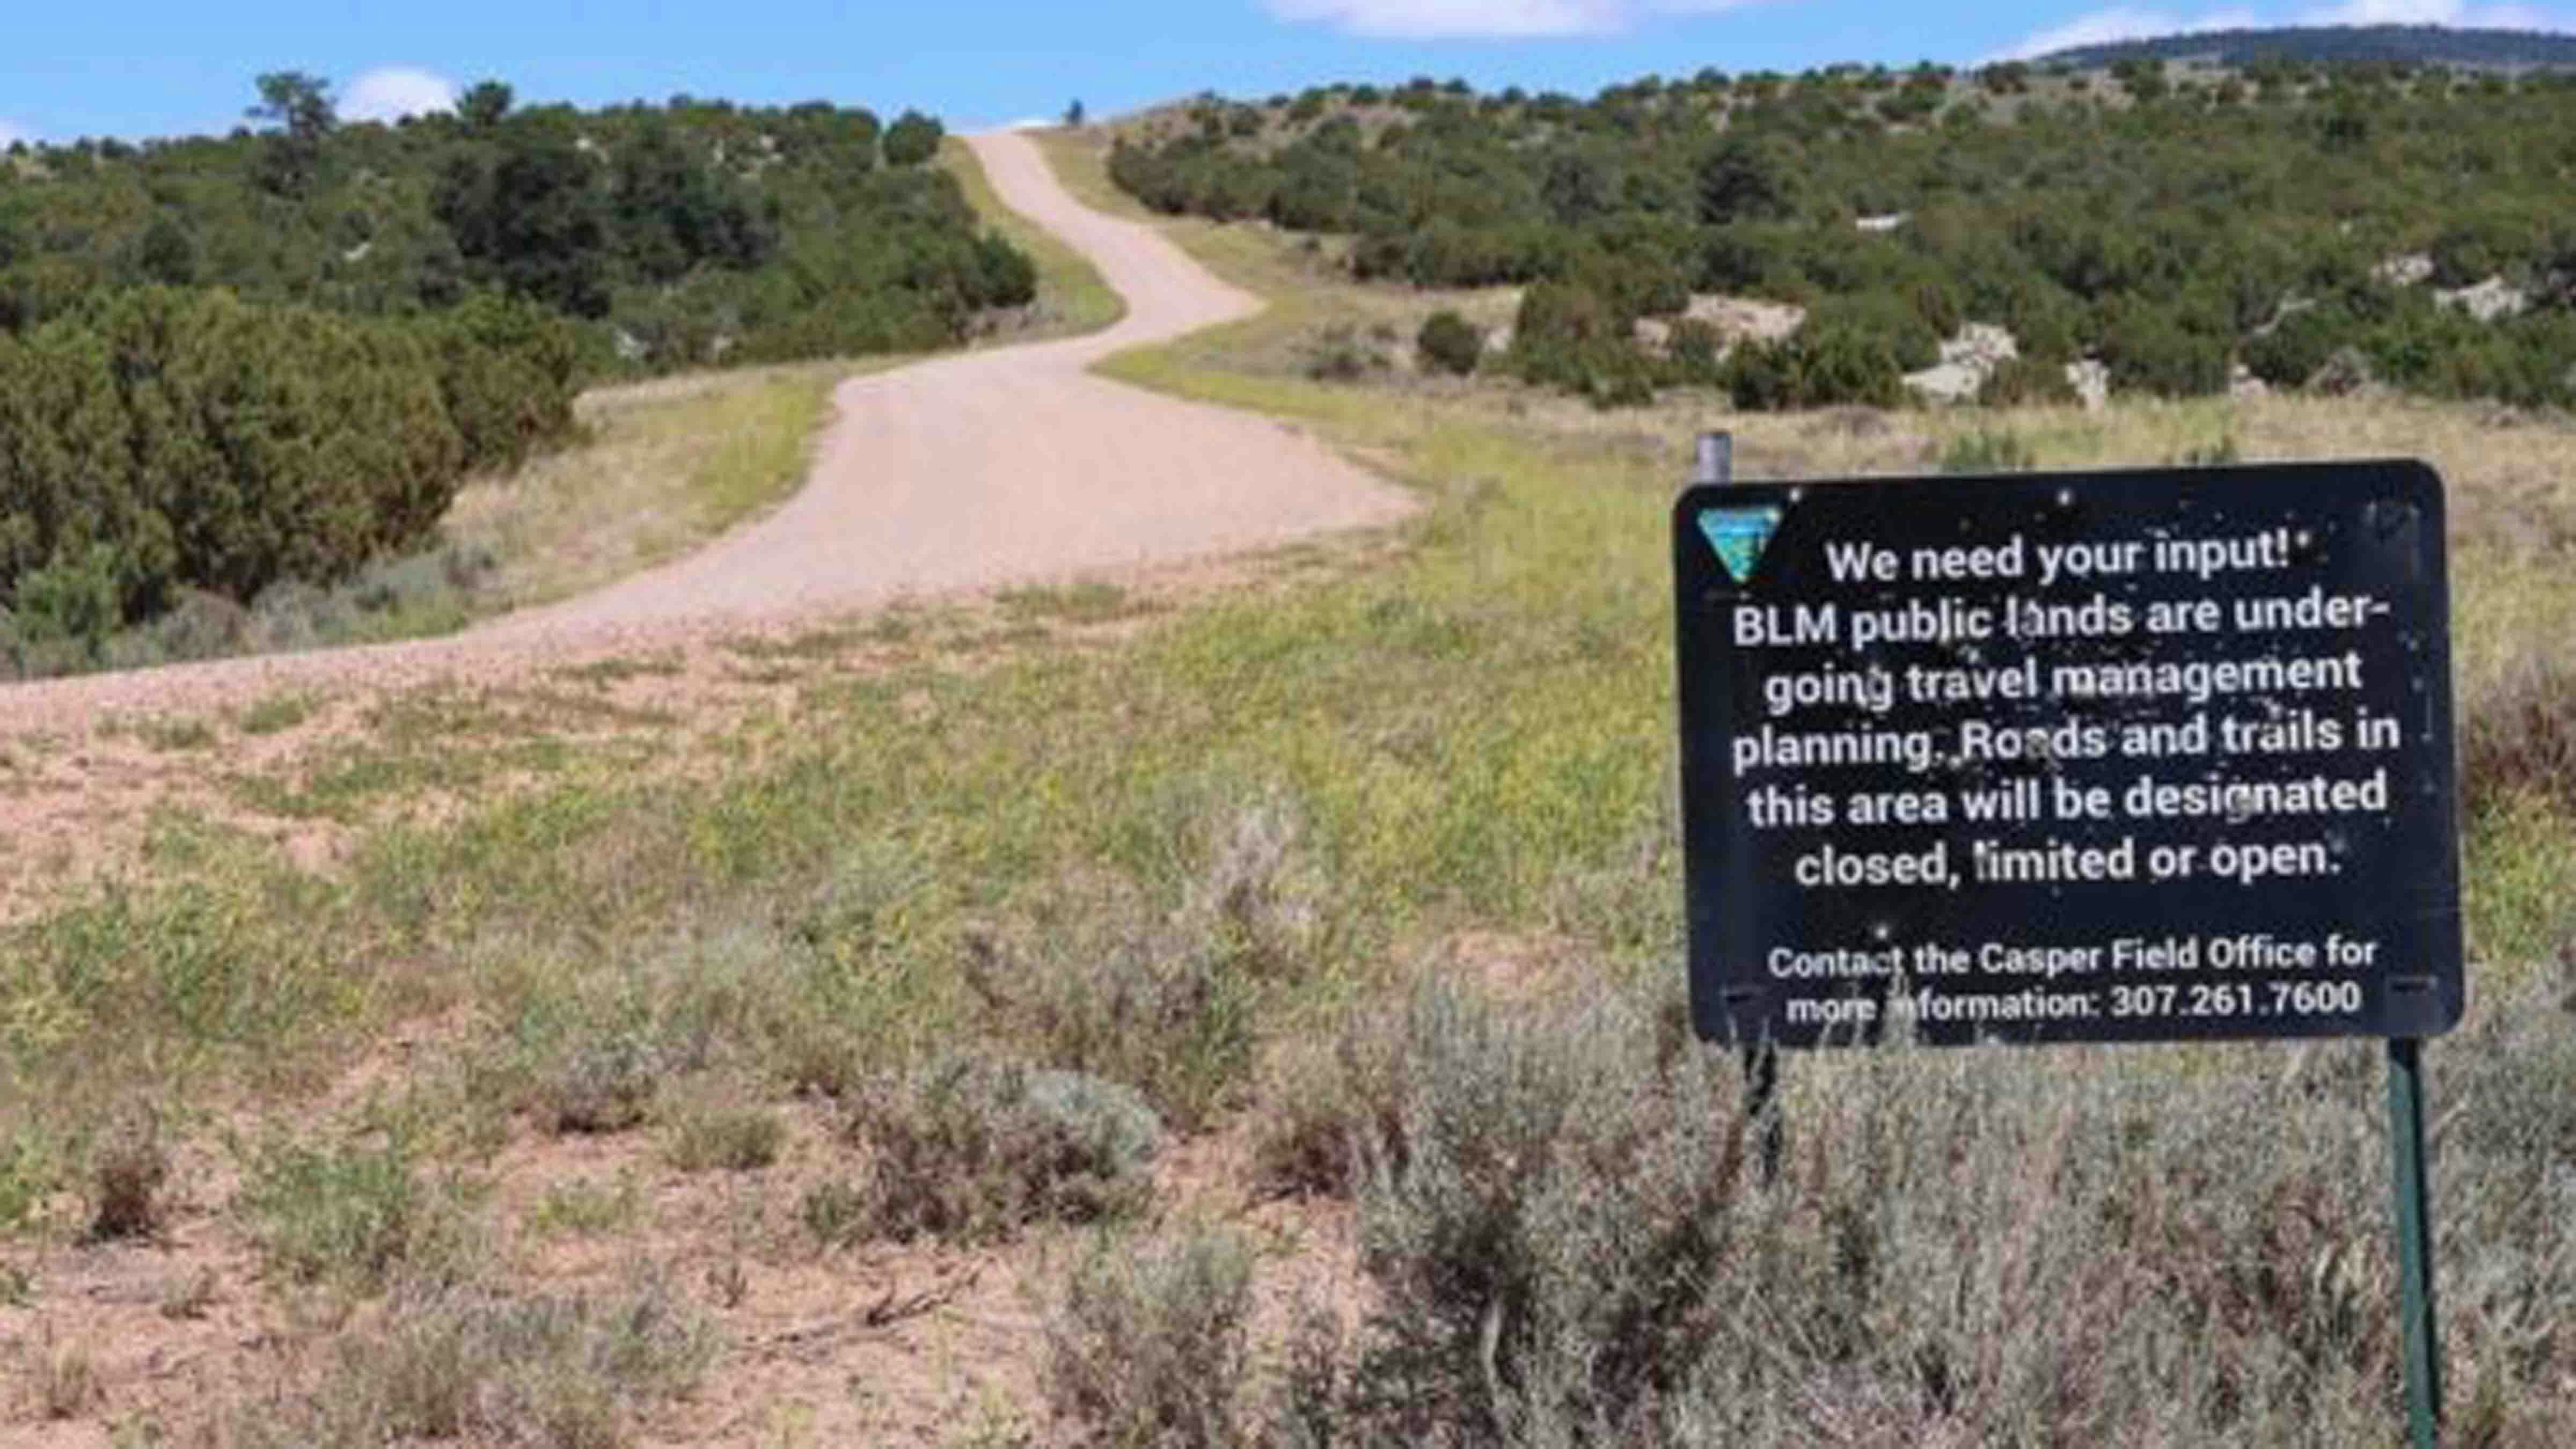 A BLM sign sits beside Circle Drive or County Road 505 south of Casper Mountain asking for input about BLM trails on its lands.